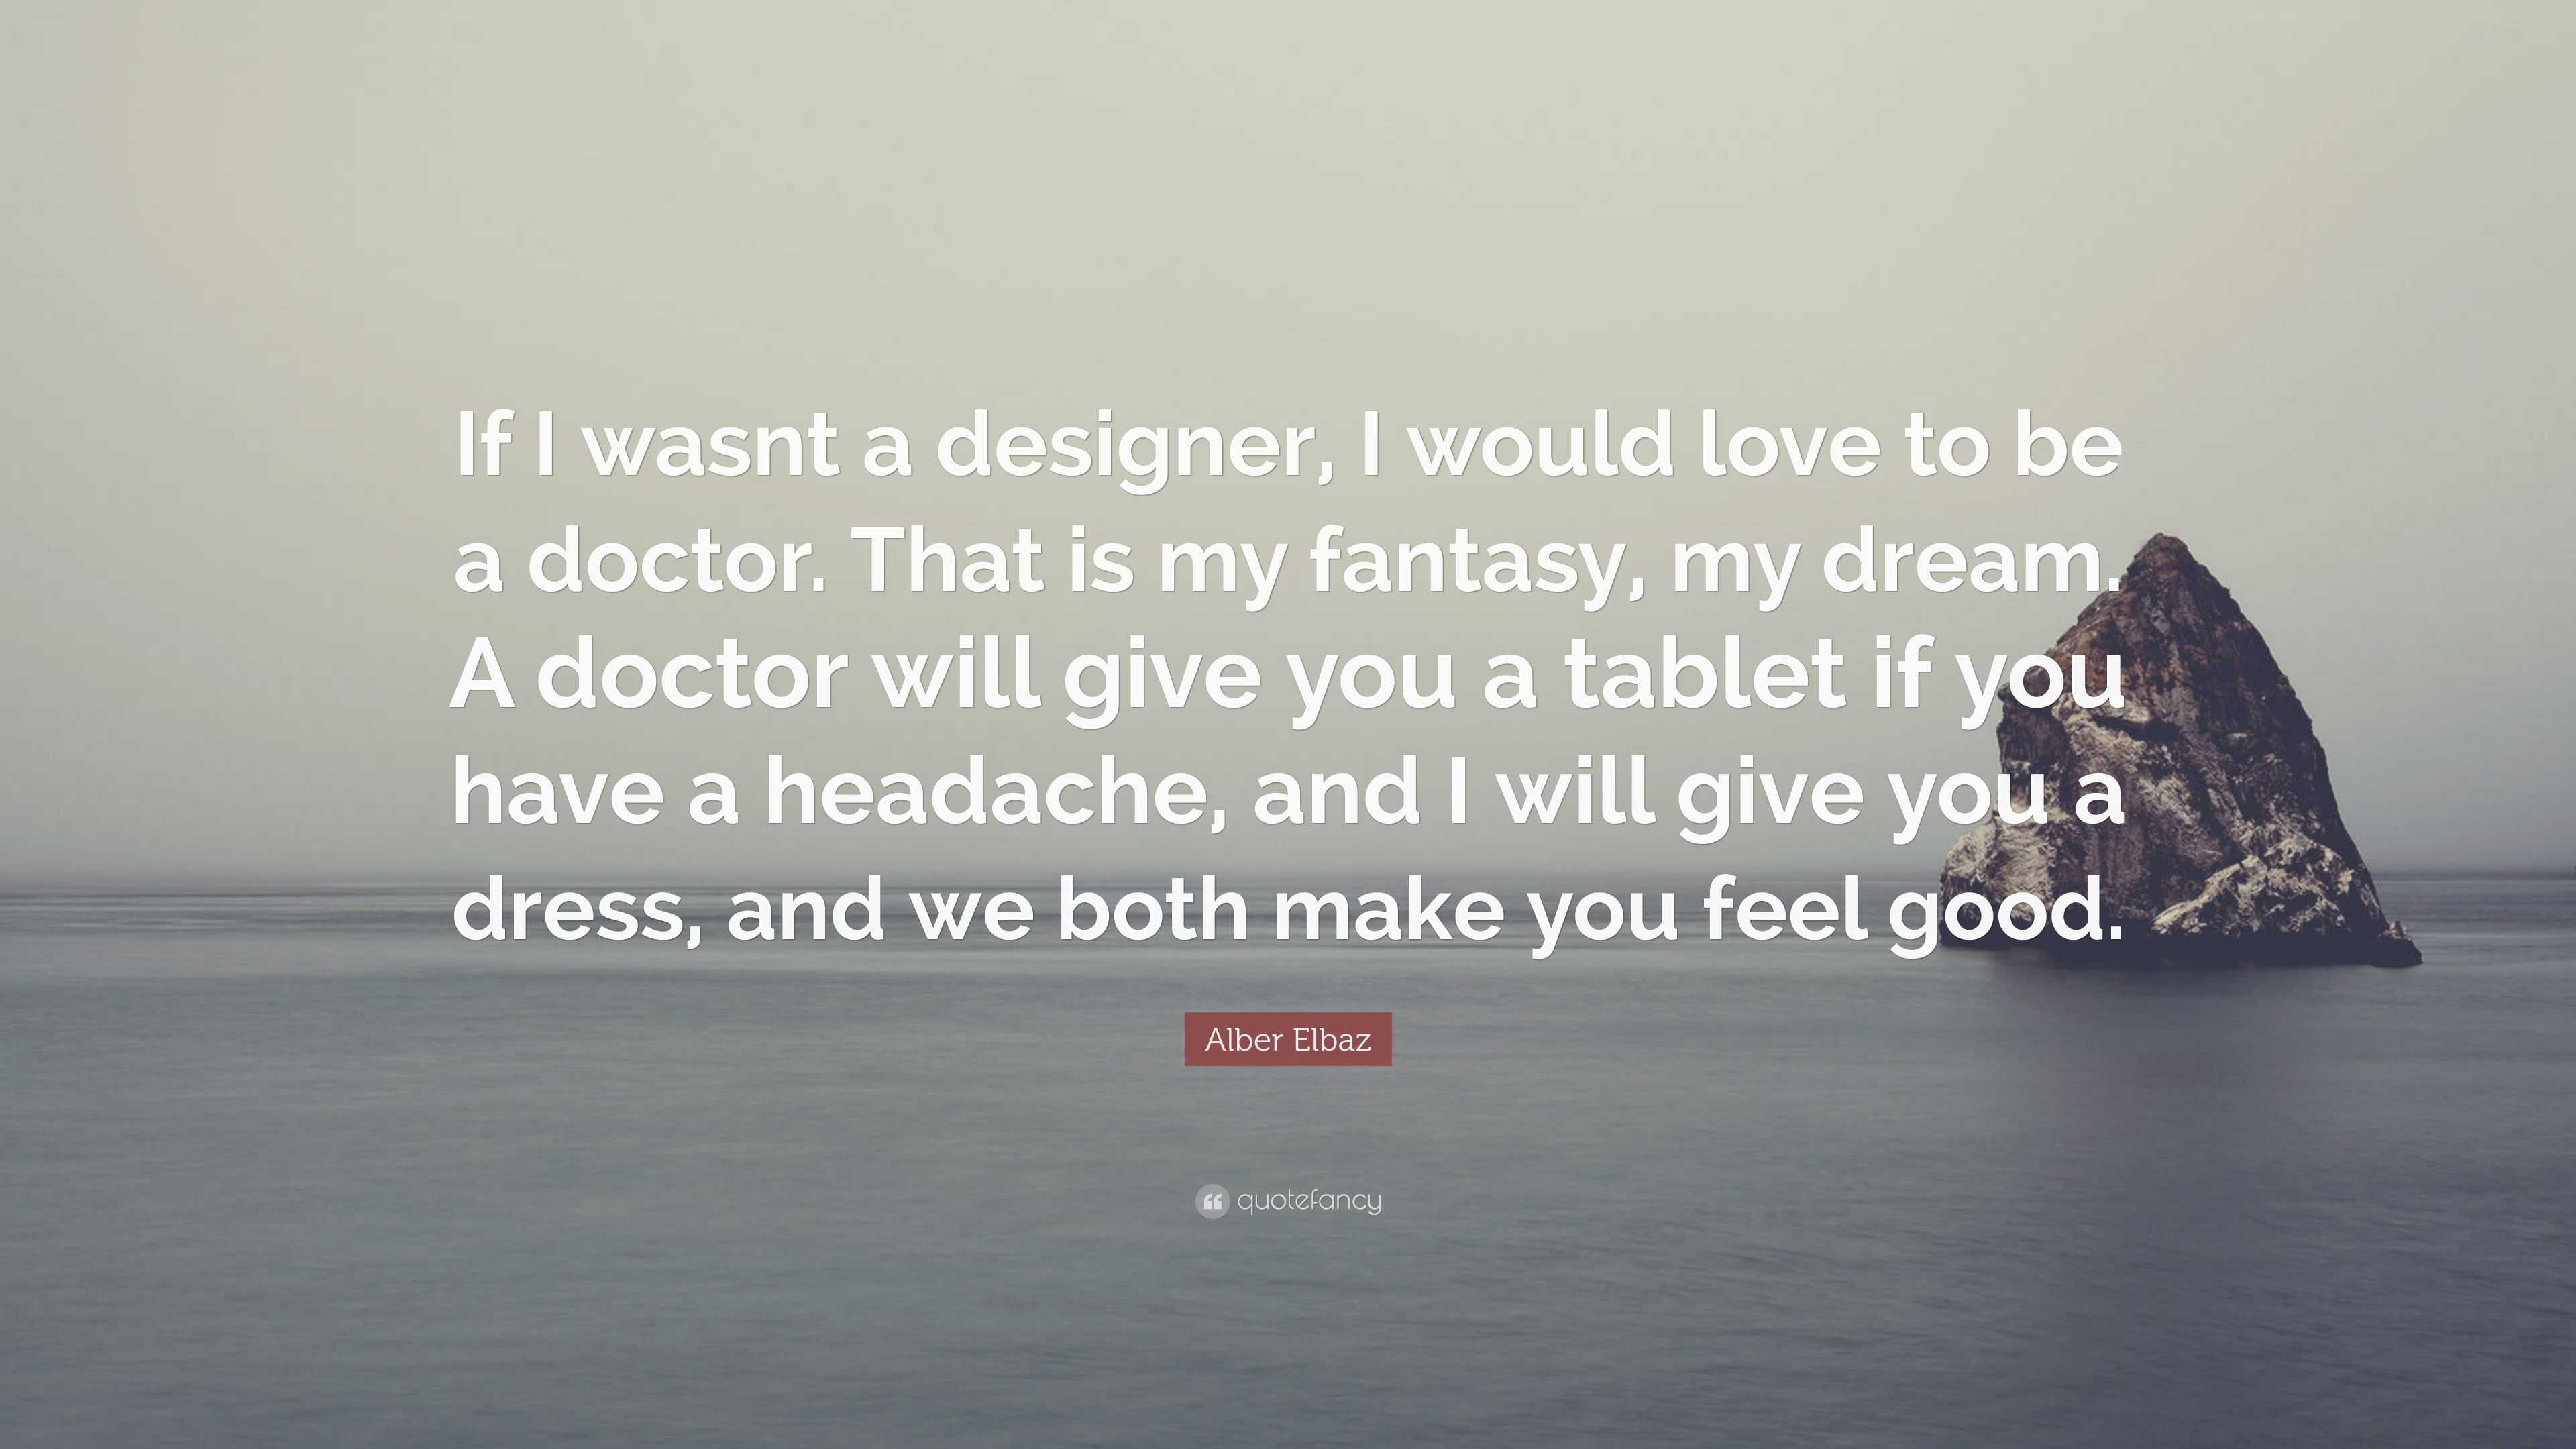 Alber Elbaz Quote: “If I wasnt a designer, I would love to be a doctor.  That is my fantasy, my dream. A doctor will give you a tablet if you”